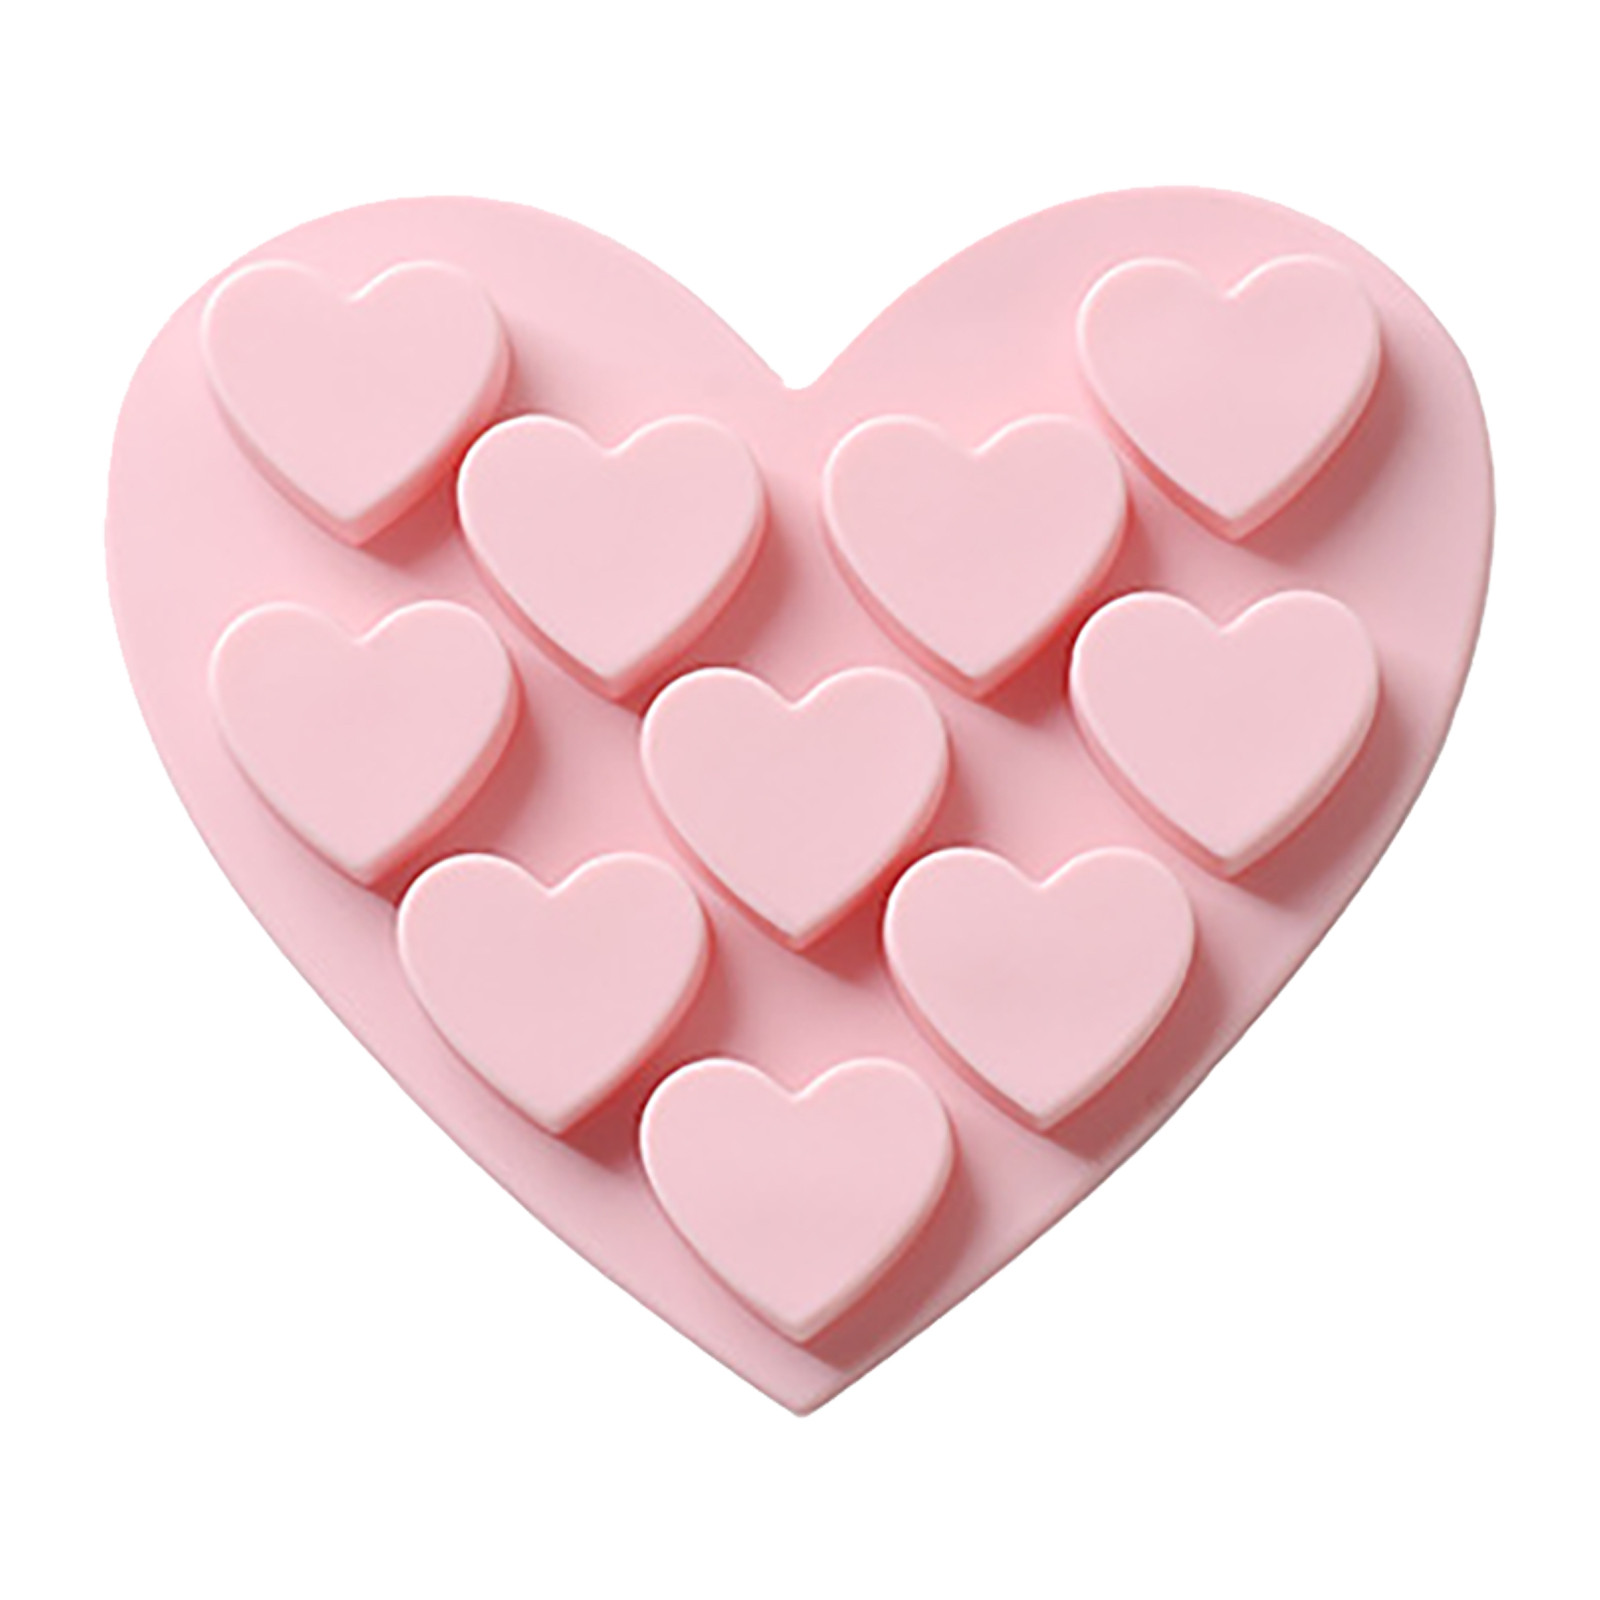 Silicone Cake Molds For Baking Cake heart-shaped Baking Shaped Love  Silicone love Shape Heart Mould Heart Cake Mould 